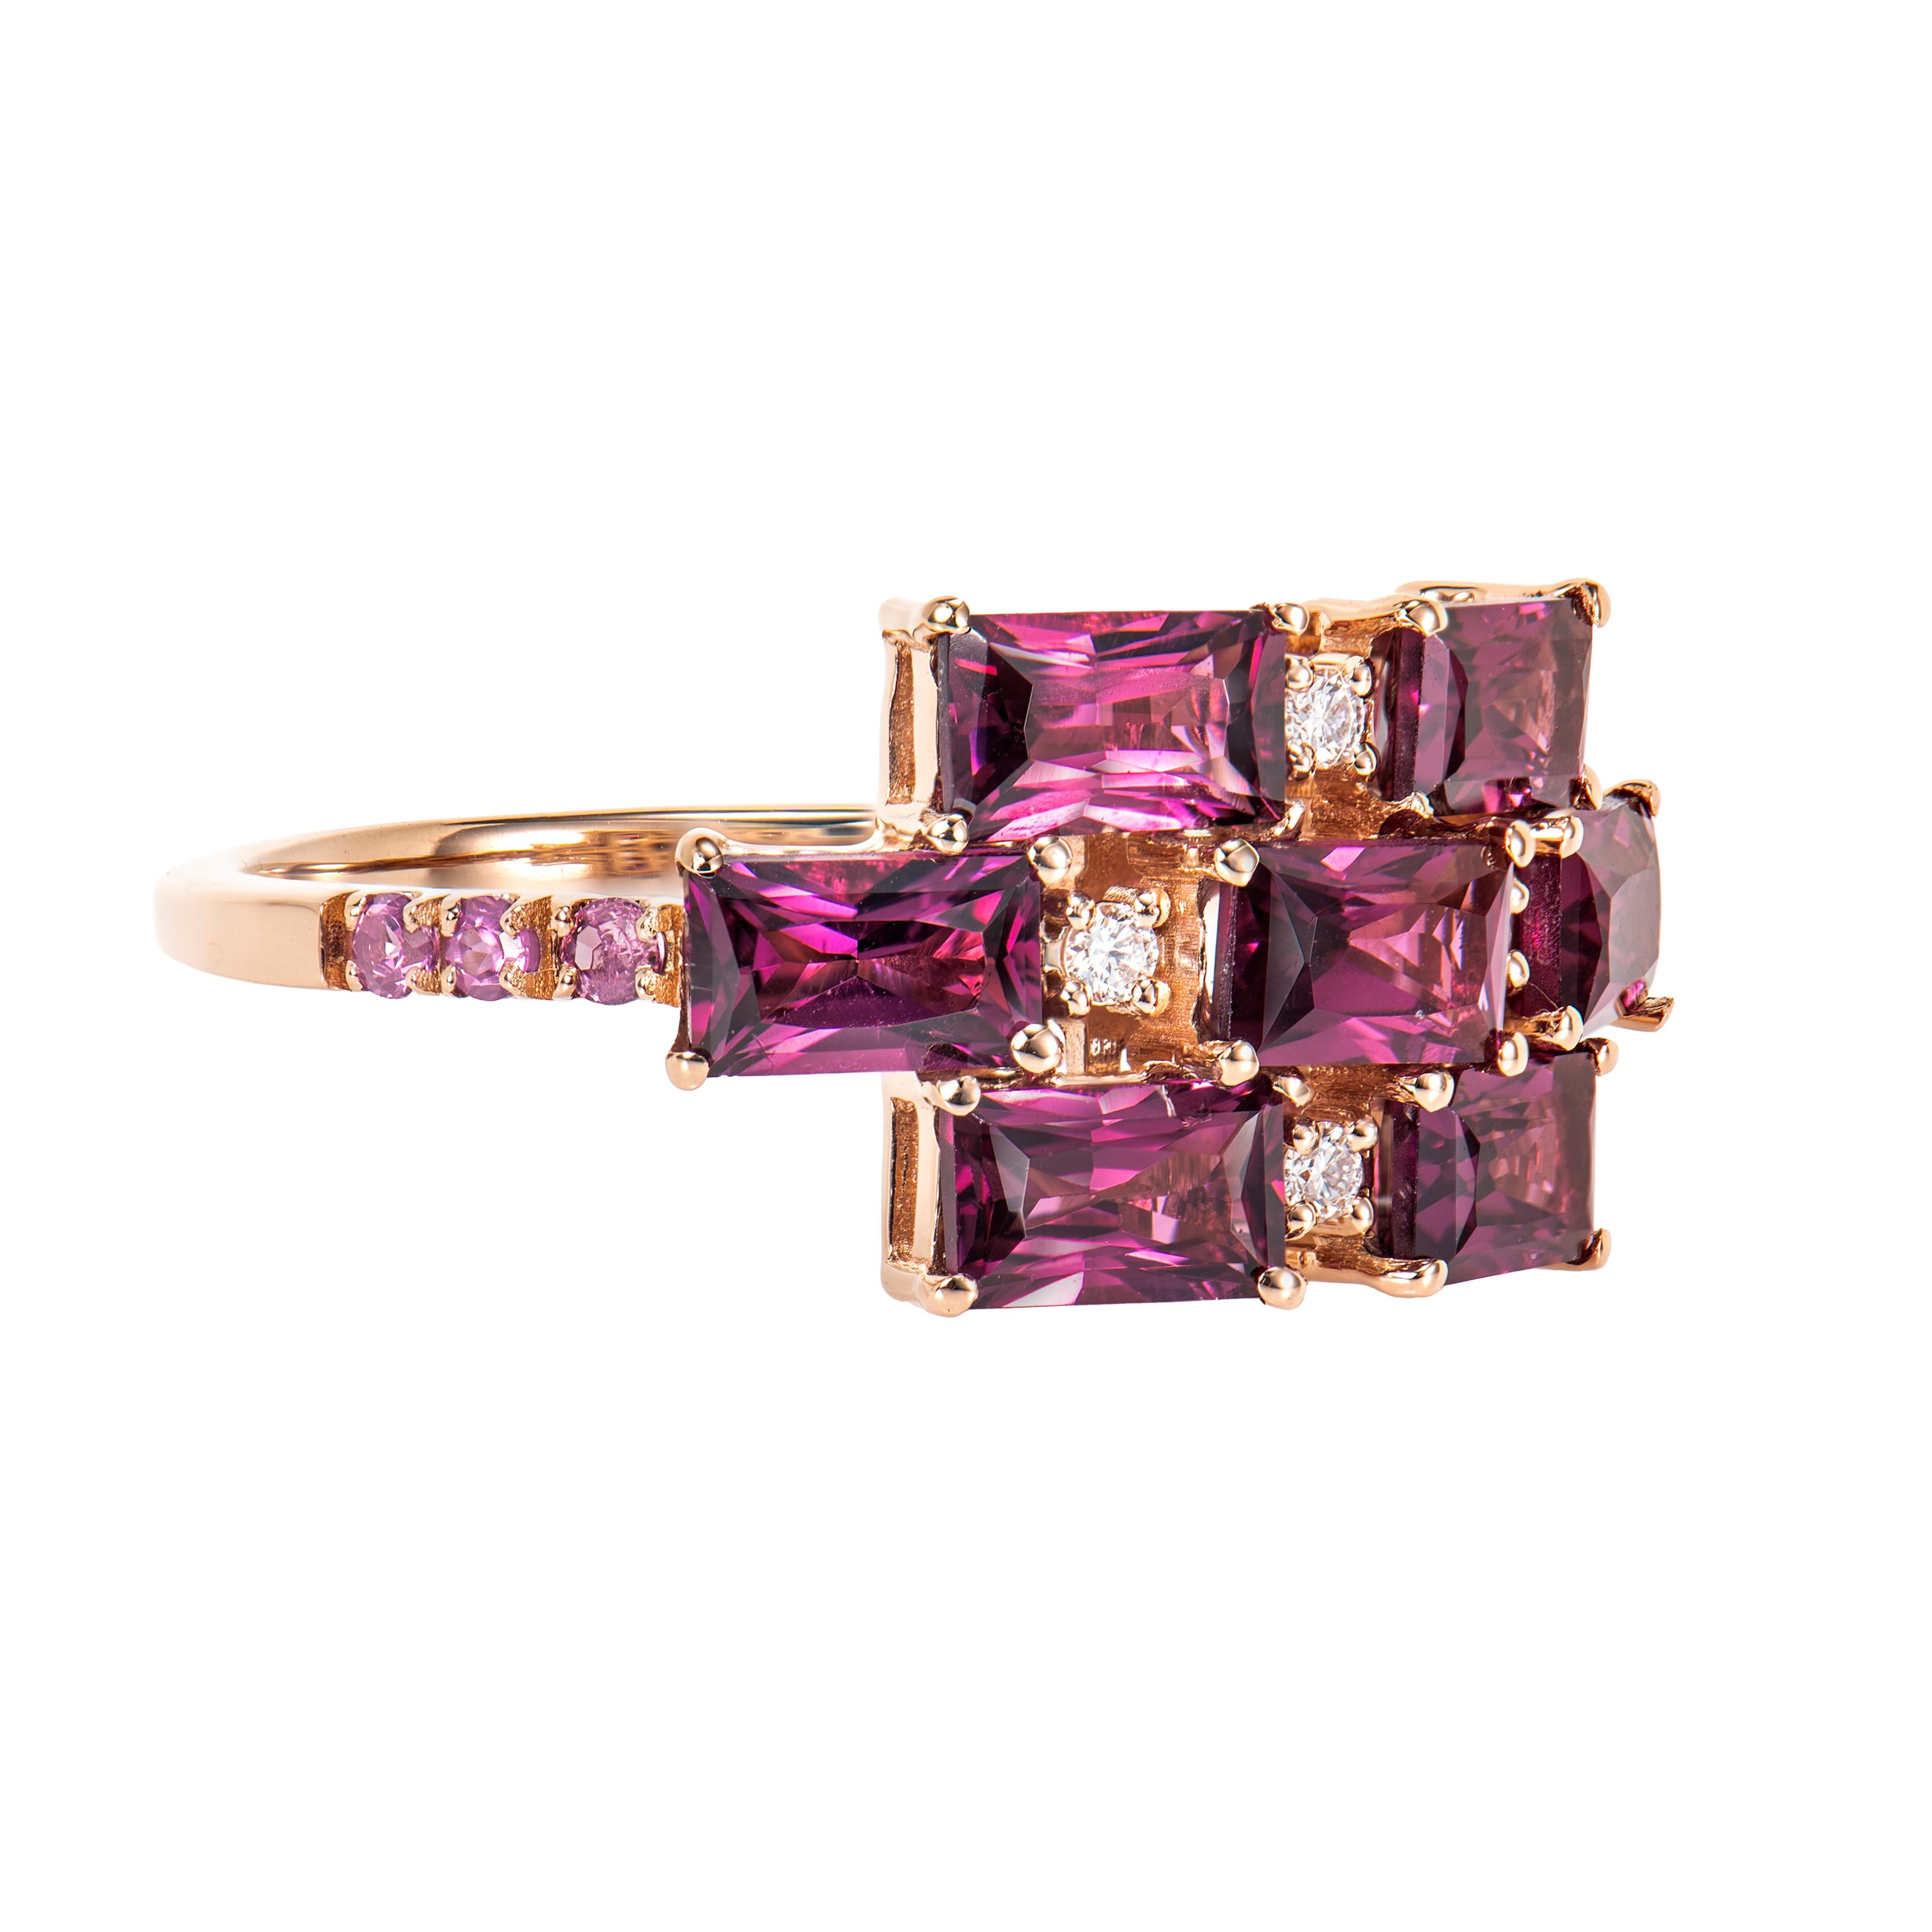 It is a fancy rhodolite ring in an octagon shape. This ring made of precious stone has a timeless, exquisite appeal that can be worn on a variety of occasions. Materials such as  rhodolite are suitable. One of these is a rose gold rhodolite ring.
 